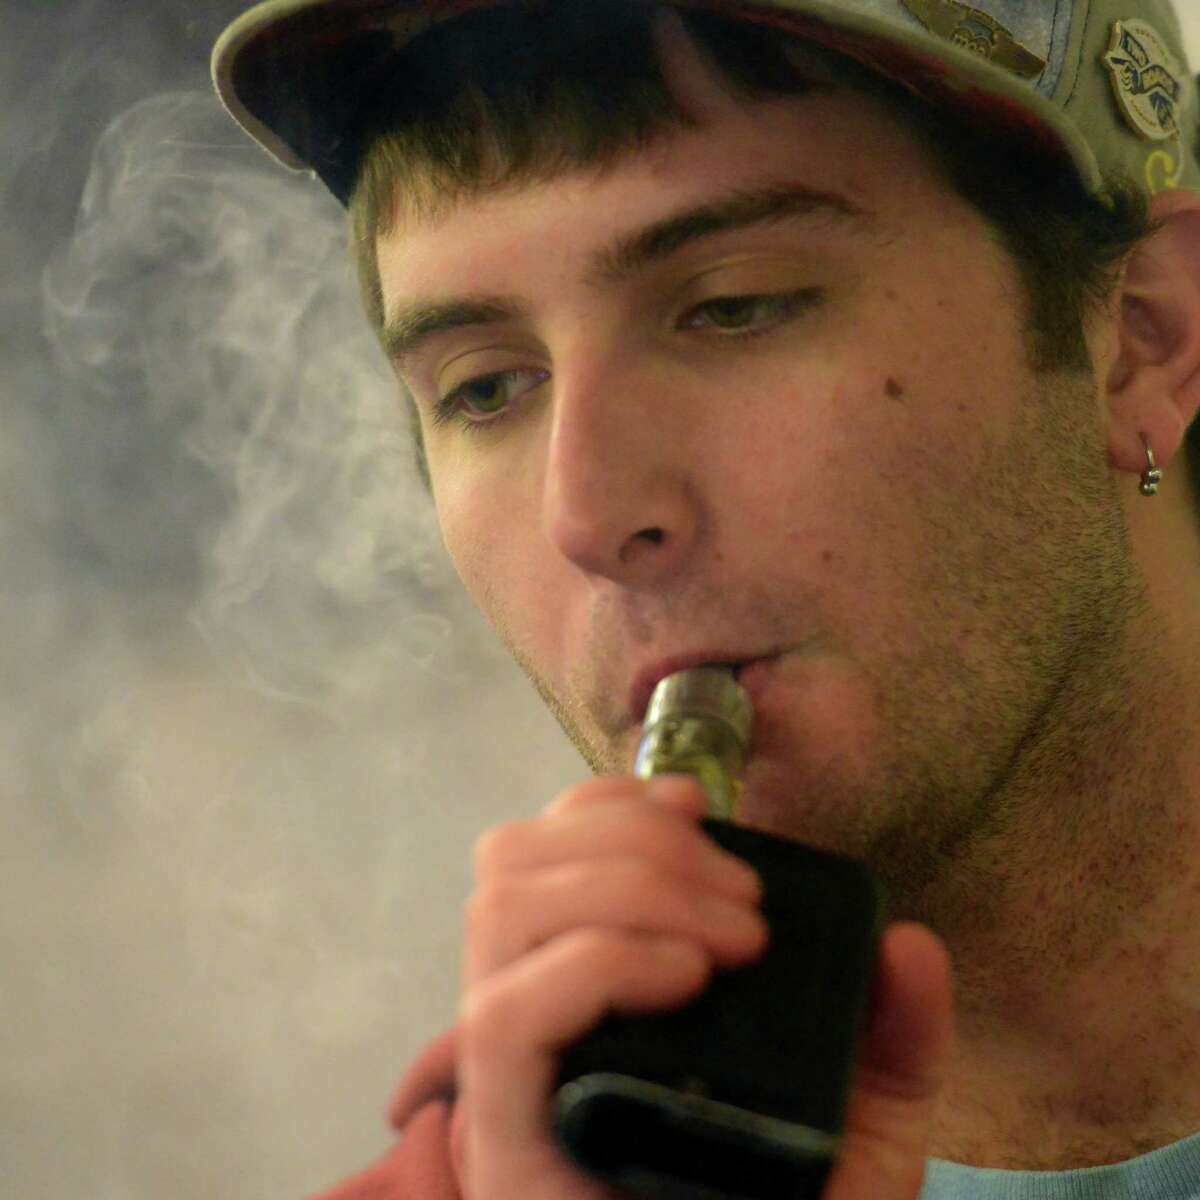 E-Stop E-Cigs co-owner Aidan Belmont vapes while at the shop on Post Road in Milford, Conn. The Ansonia Board of Aldermen decidede not to include vaping in a ban prohibiting smoking and chewing tobacco products in the city’s parks, recreational sites and athletic fields.